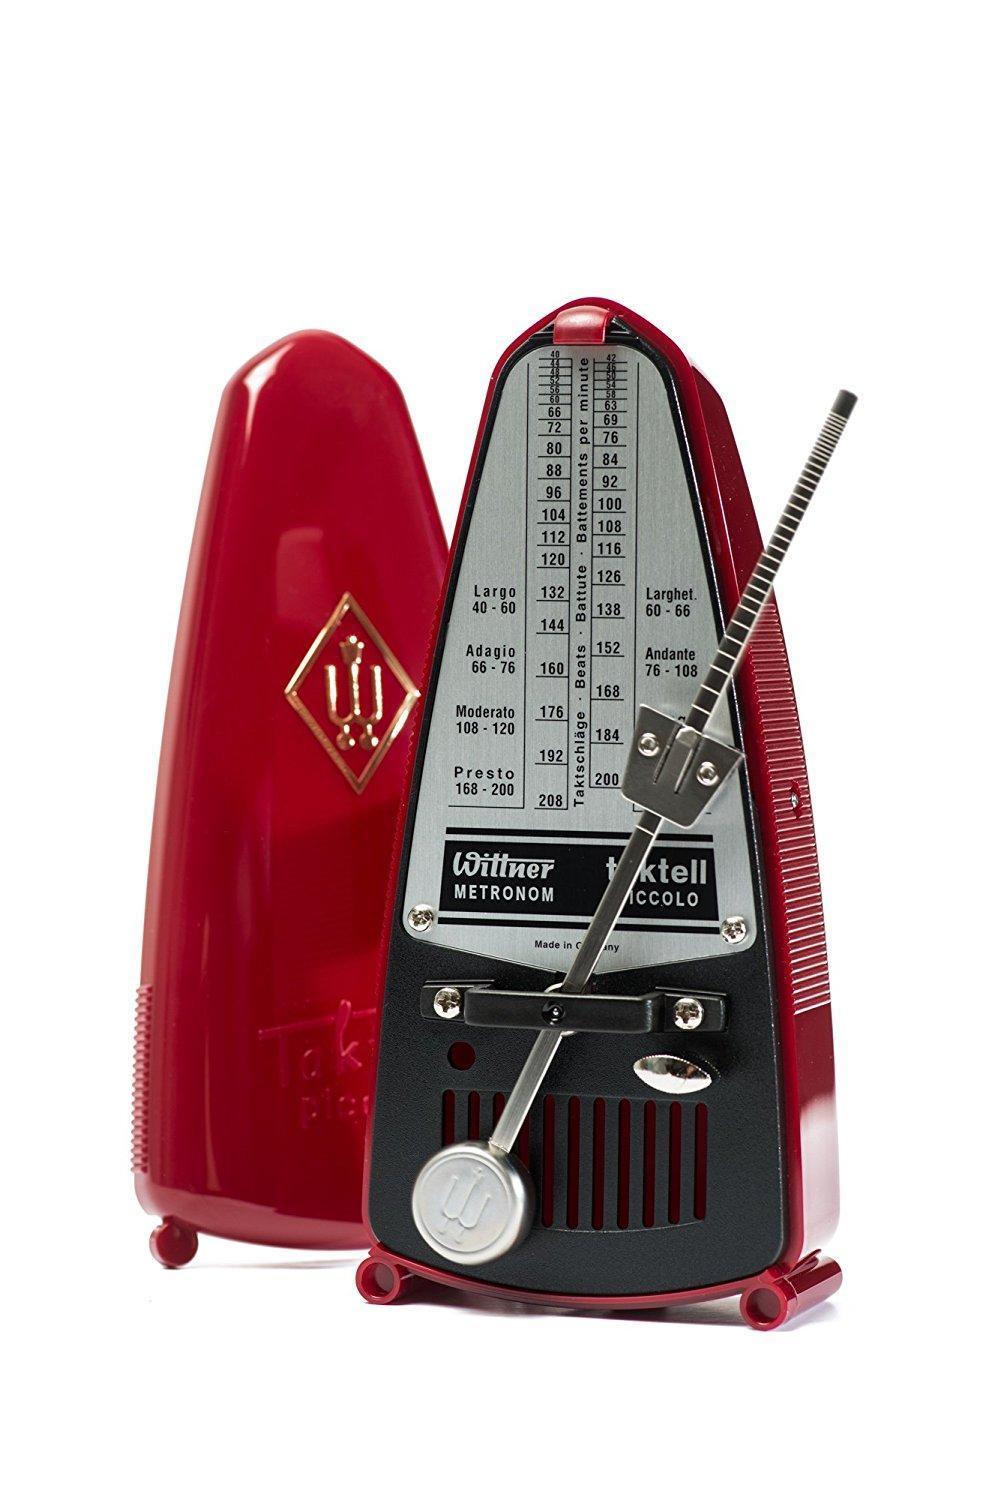 Wittner Taktell Piccolo Metronome Ruby Piano Traders